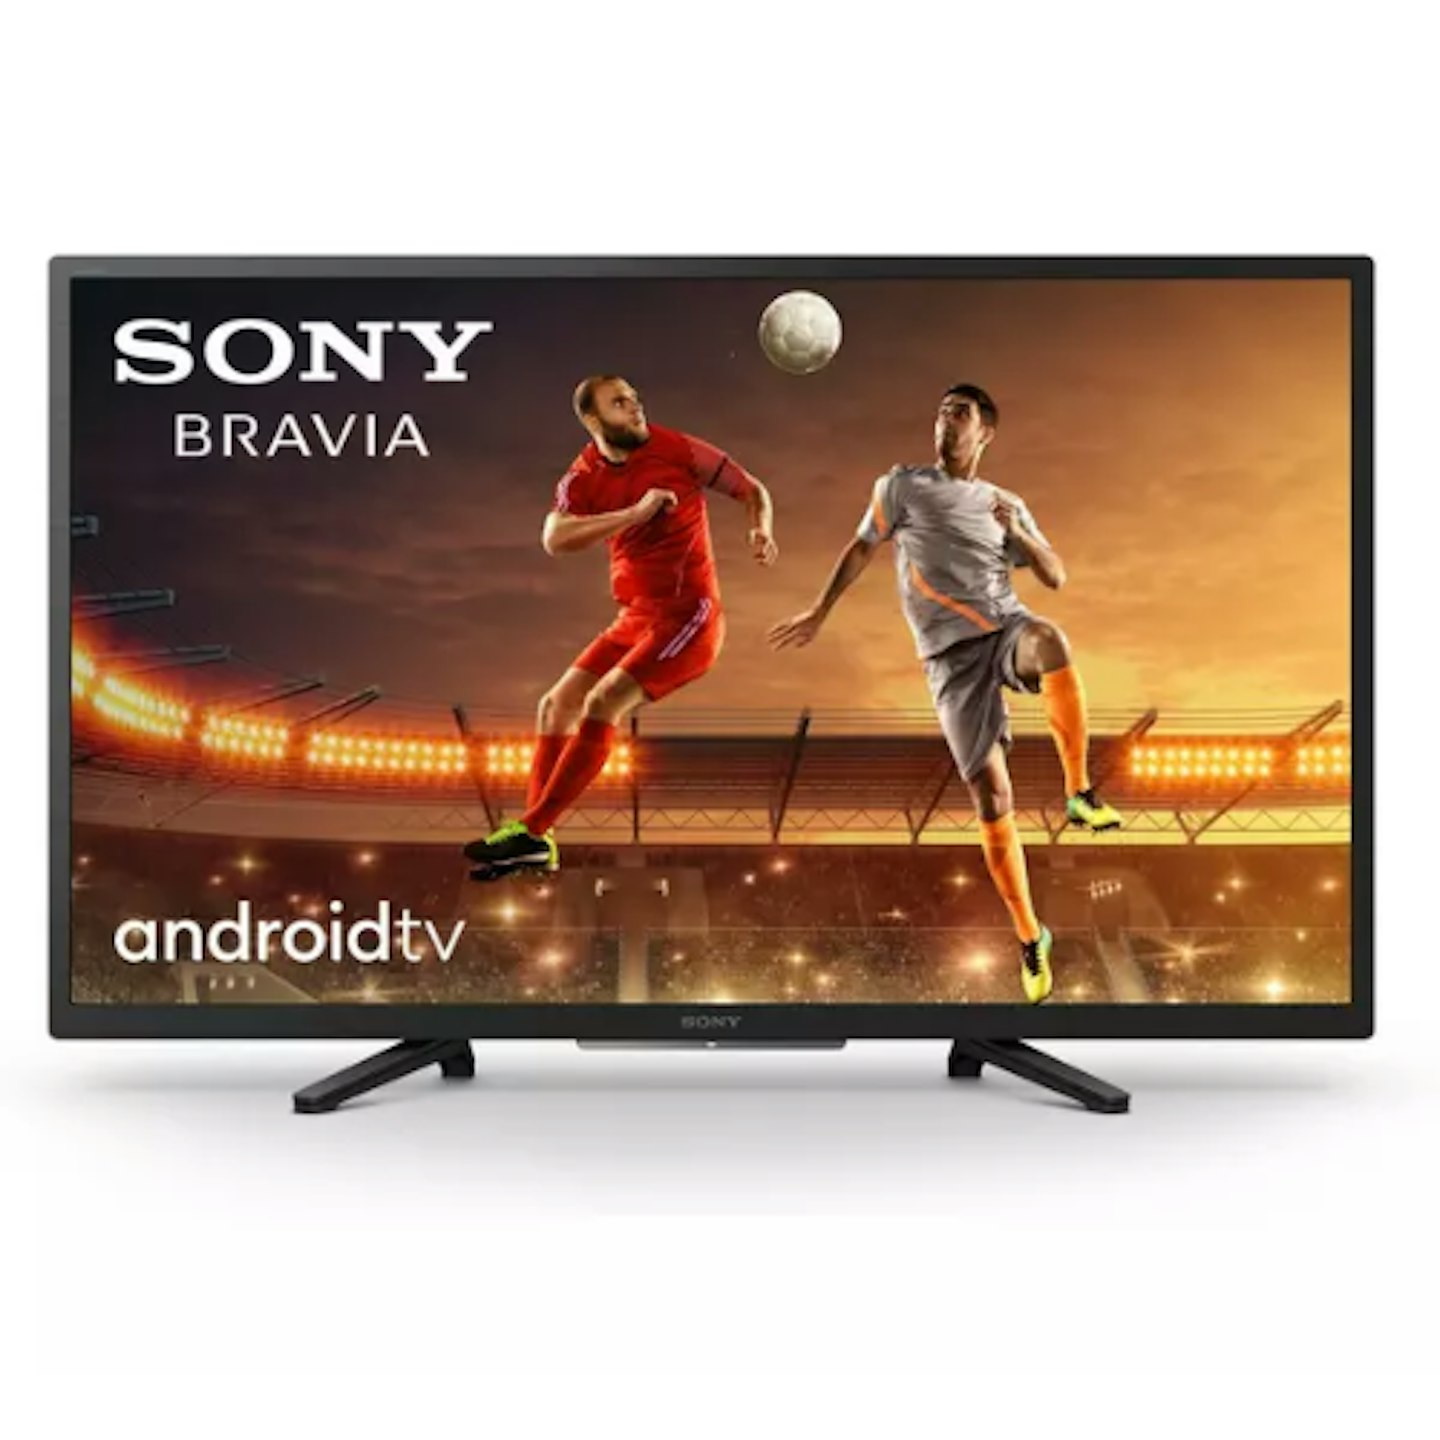 Sony Bravia KD32W800P1U 32-inch Smart HD Ready HDR LED TV with Google Assistant